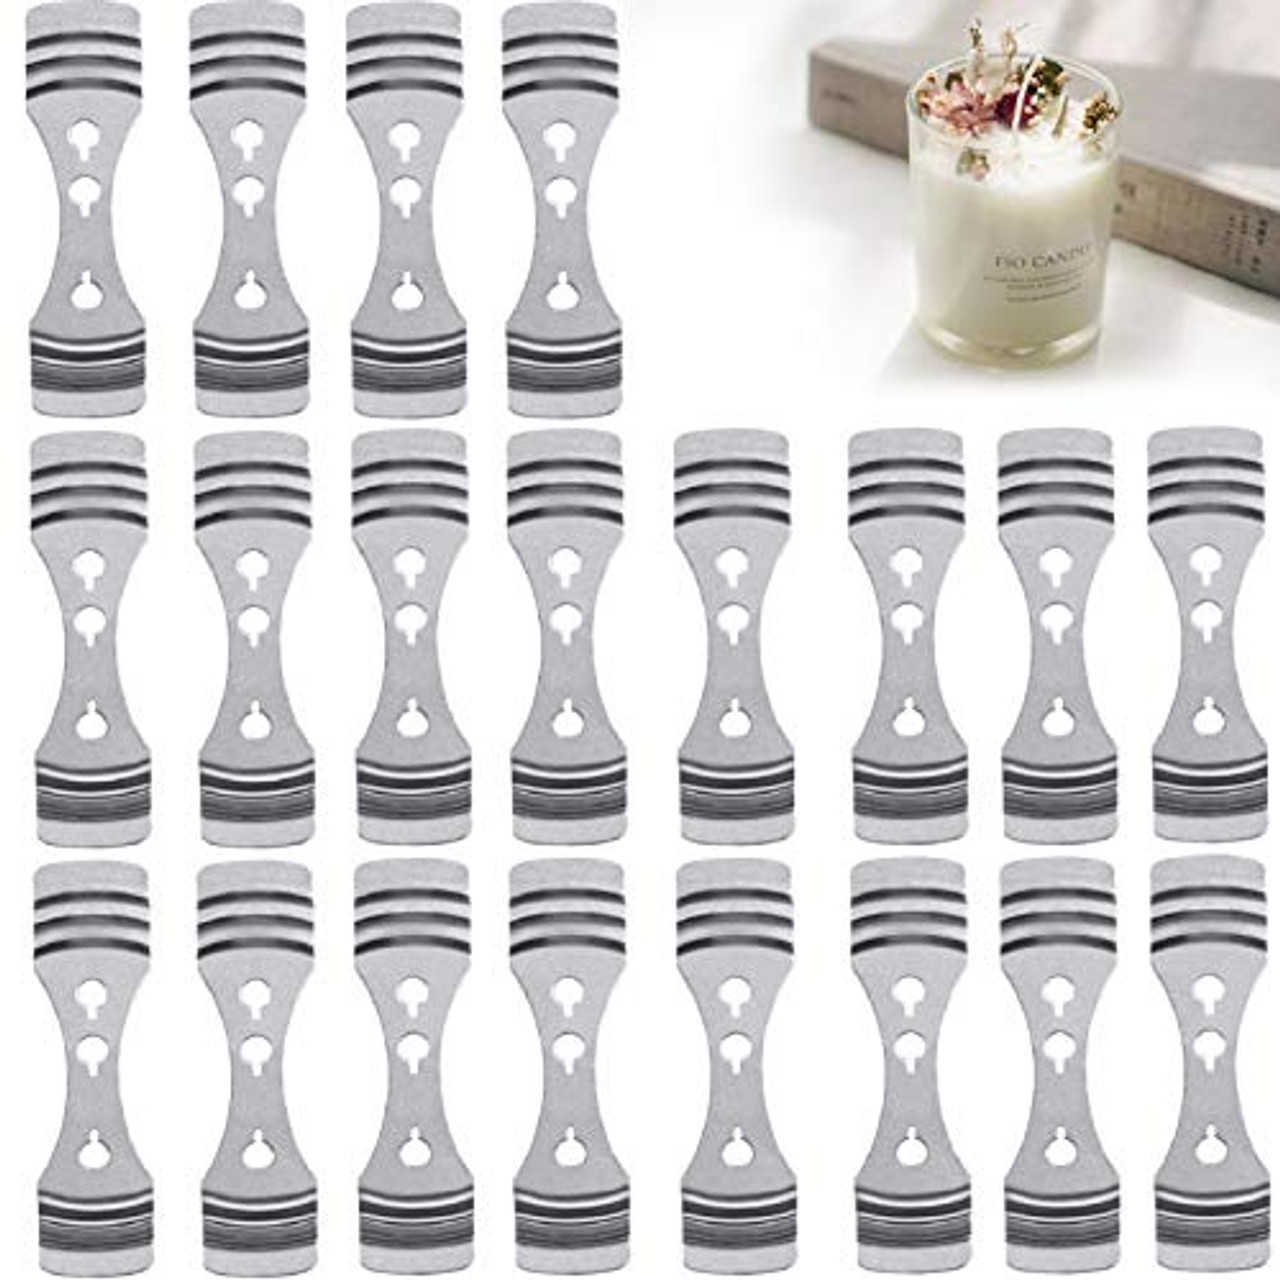 60pcs Metal Candle Wick Centering Devices, Silver Stainless Steel